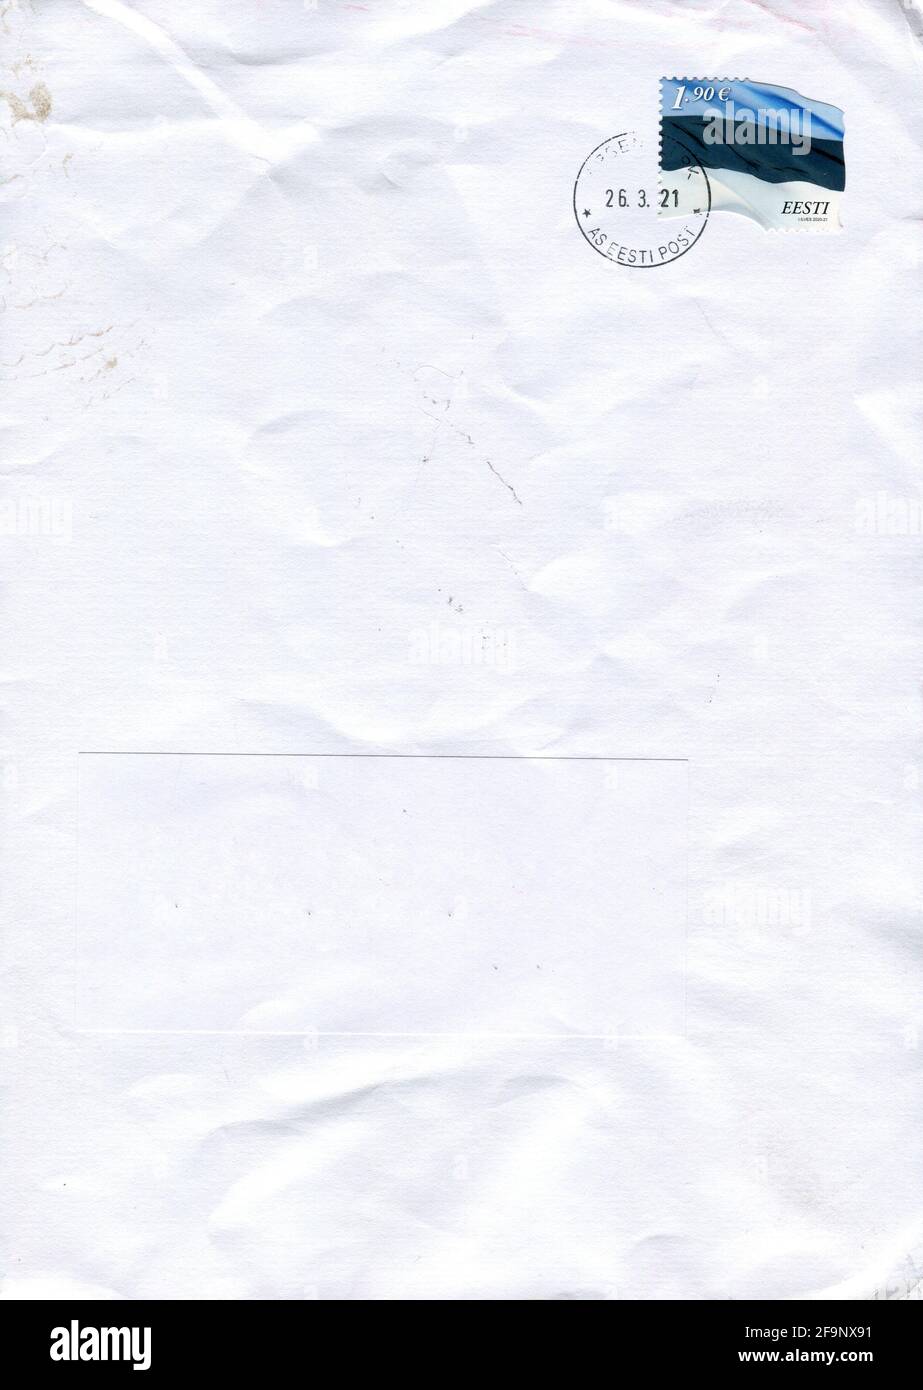 GOMEL, BELARUS - APRIL 20, 2021: Old envelope which was dispatched from Estonia to Gomel, Belarus, March 26, 2021. Stock Photo